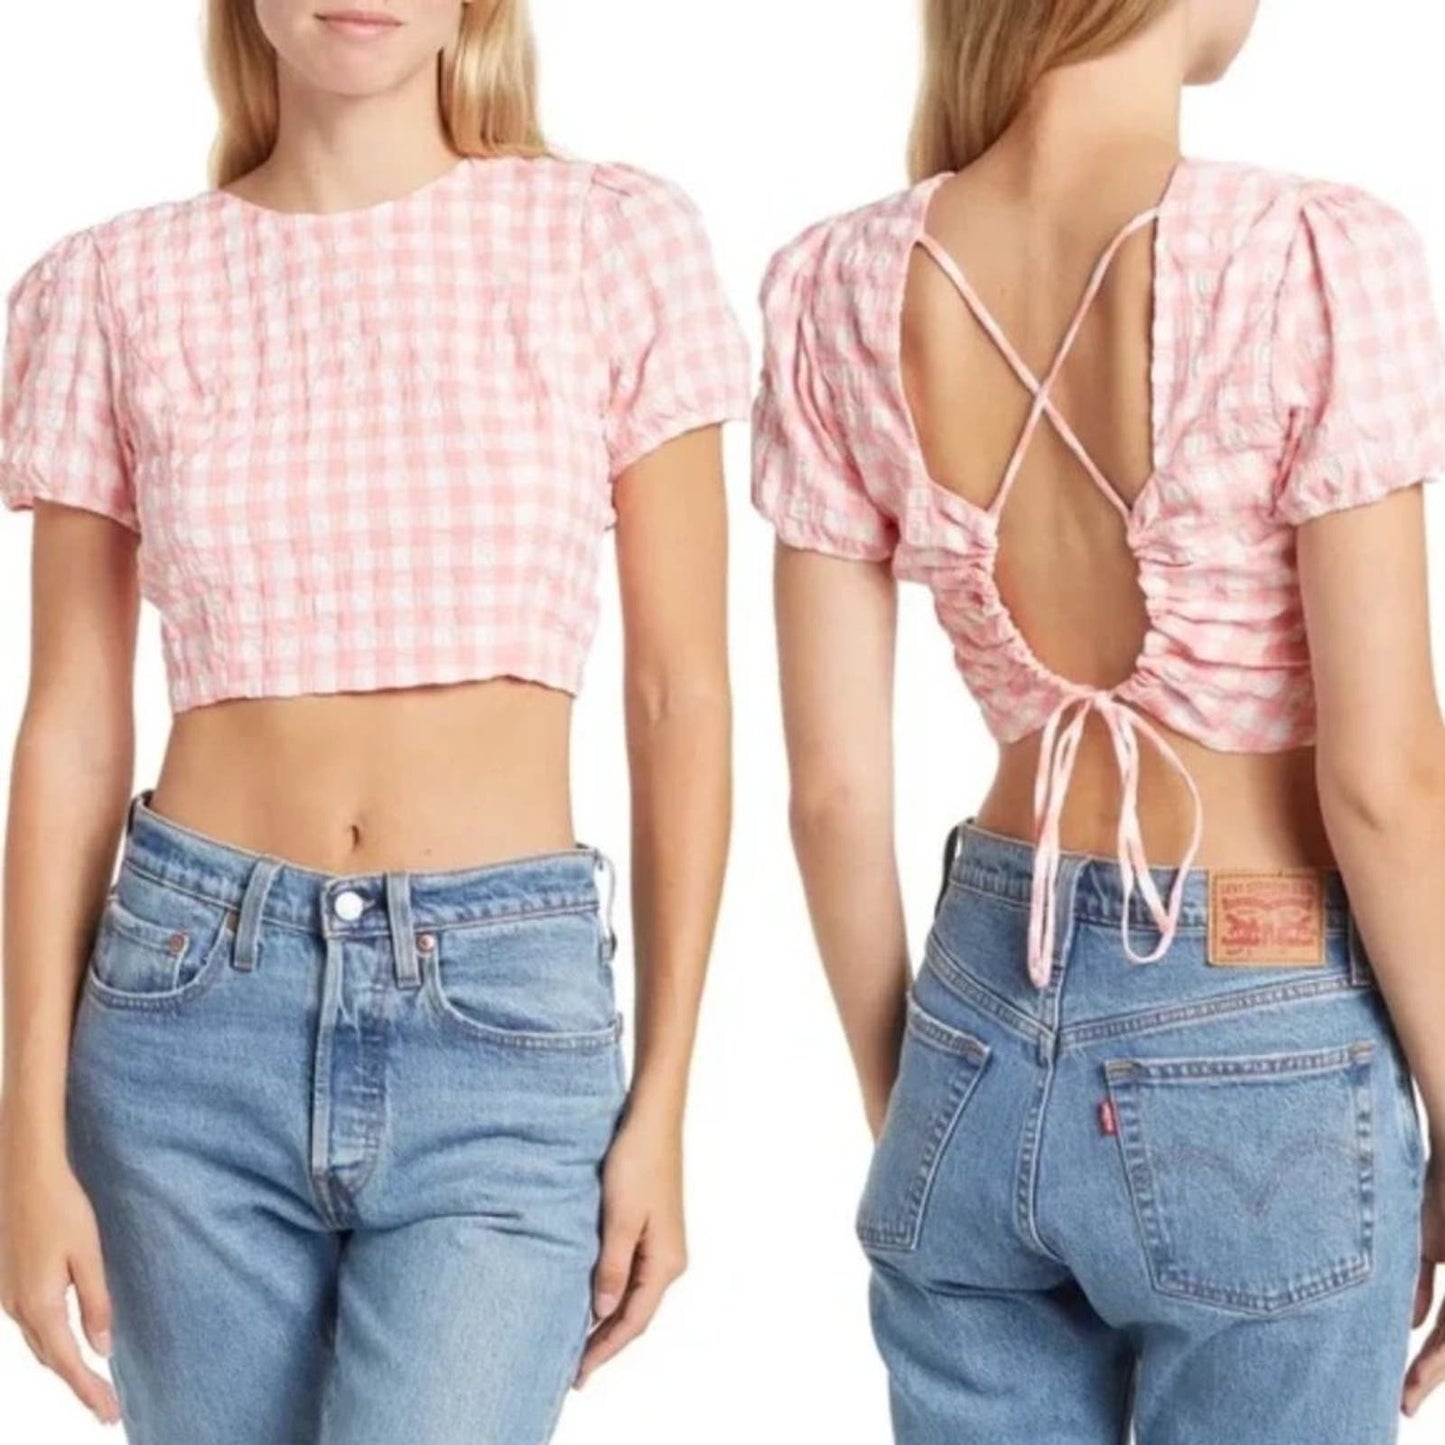 Elodie Pink & White Gingham Crop Top Tie Back NWT Size Large